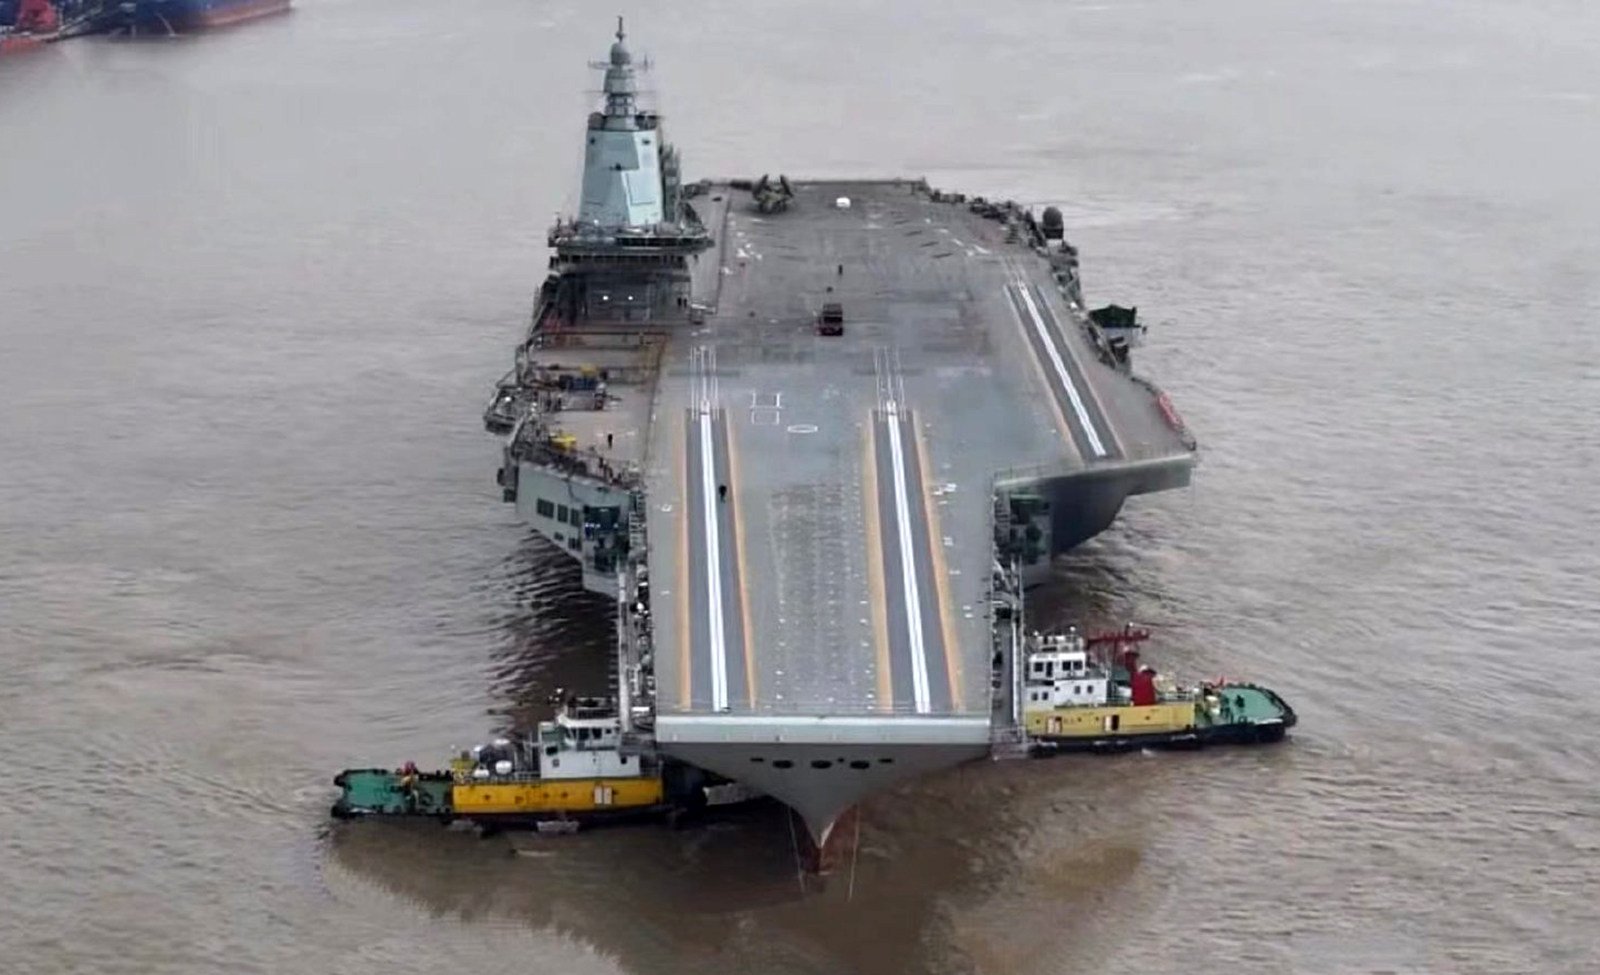 The Fujian, China’s third and most advanced carrier to date, is awaiting sea trials. Photo: CCTV